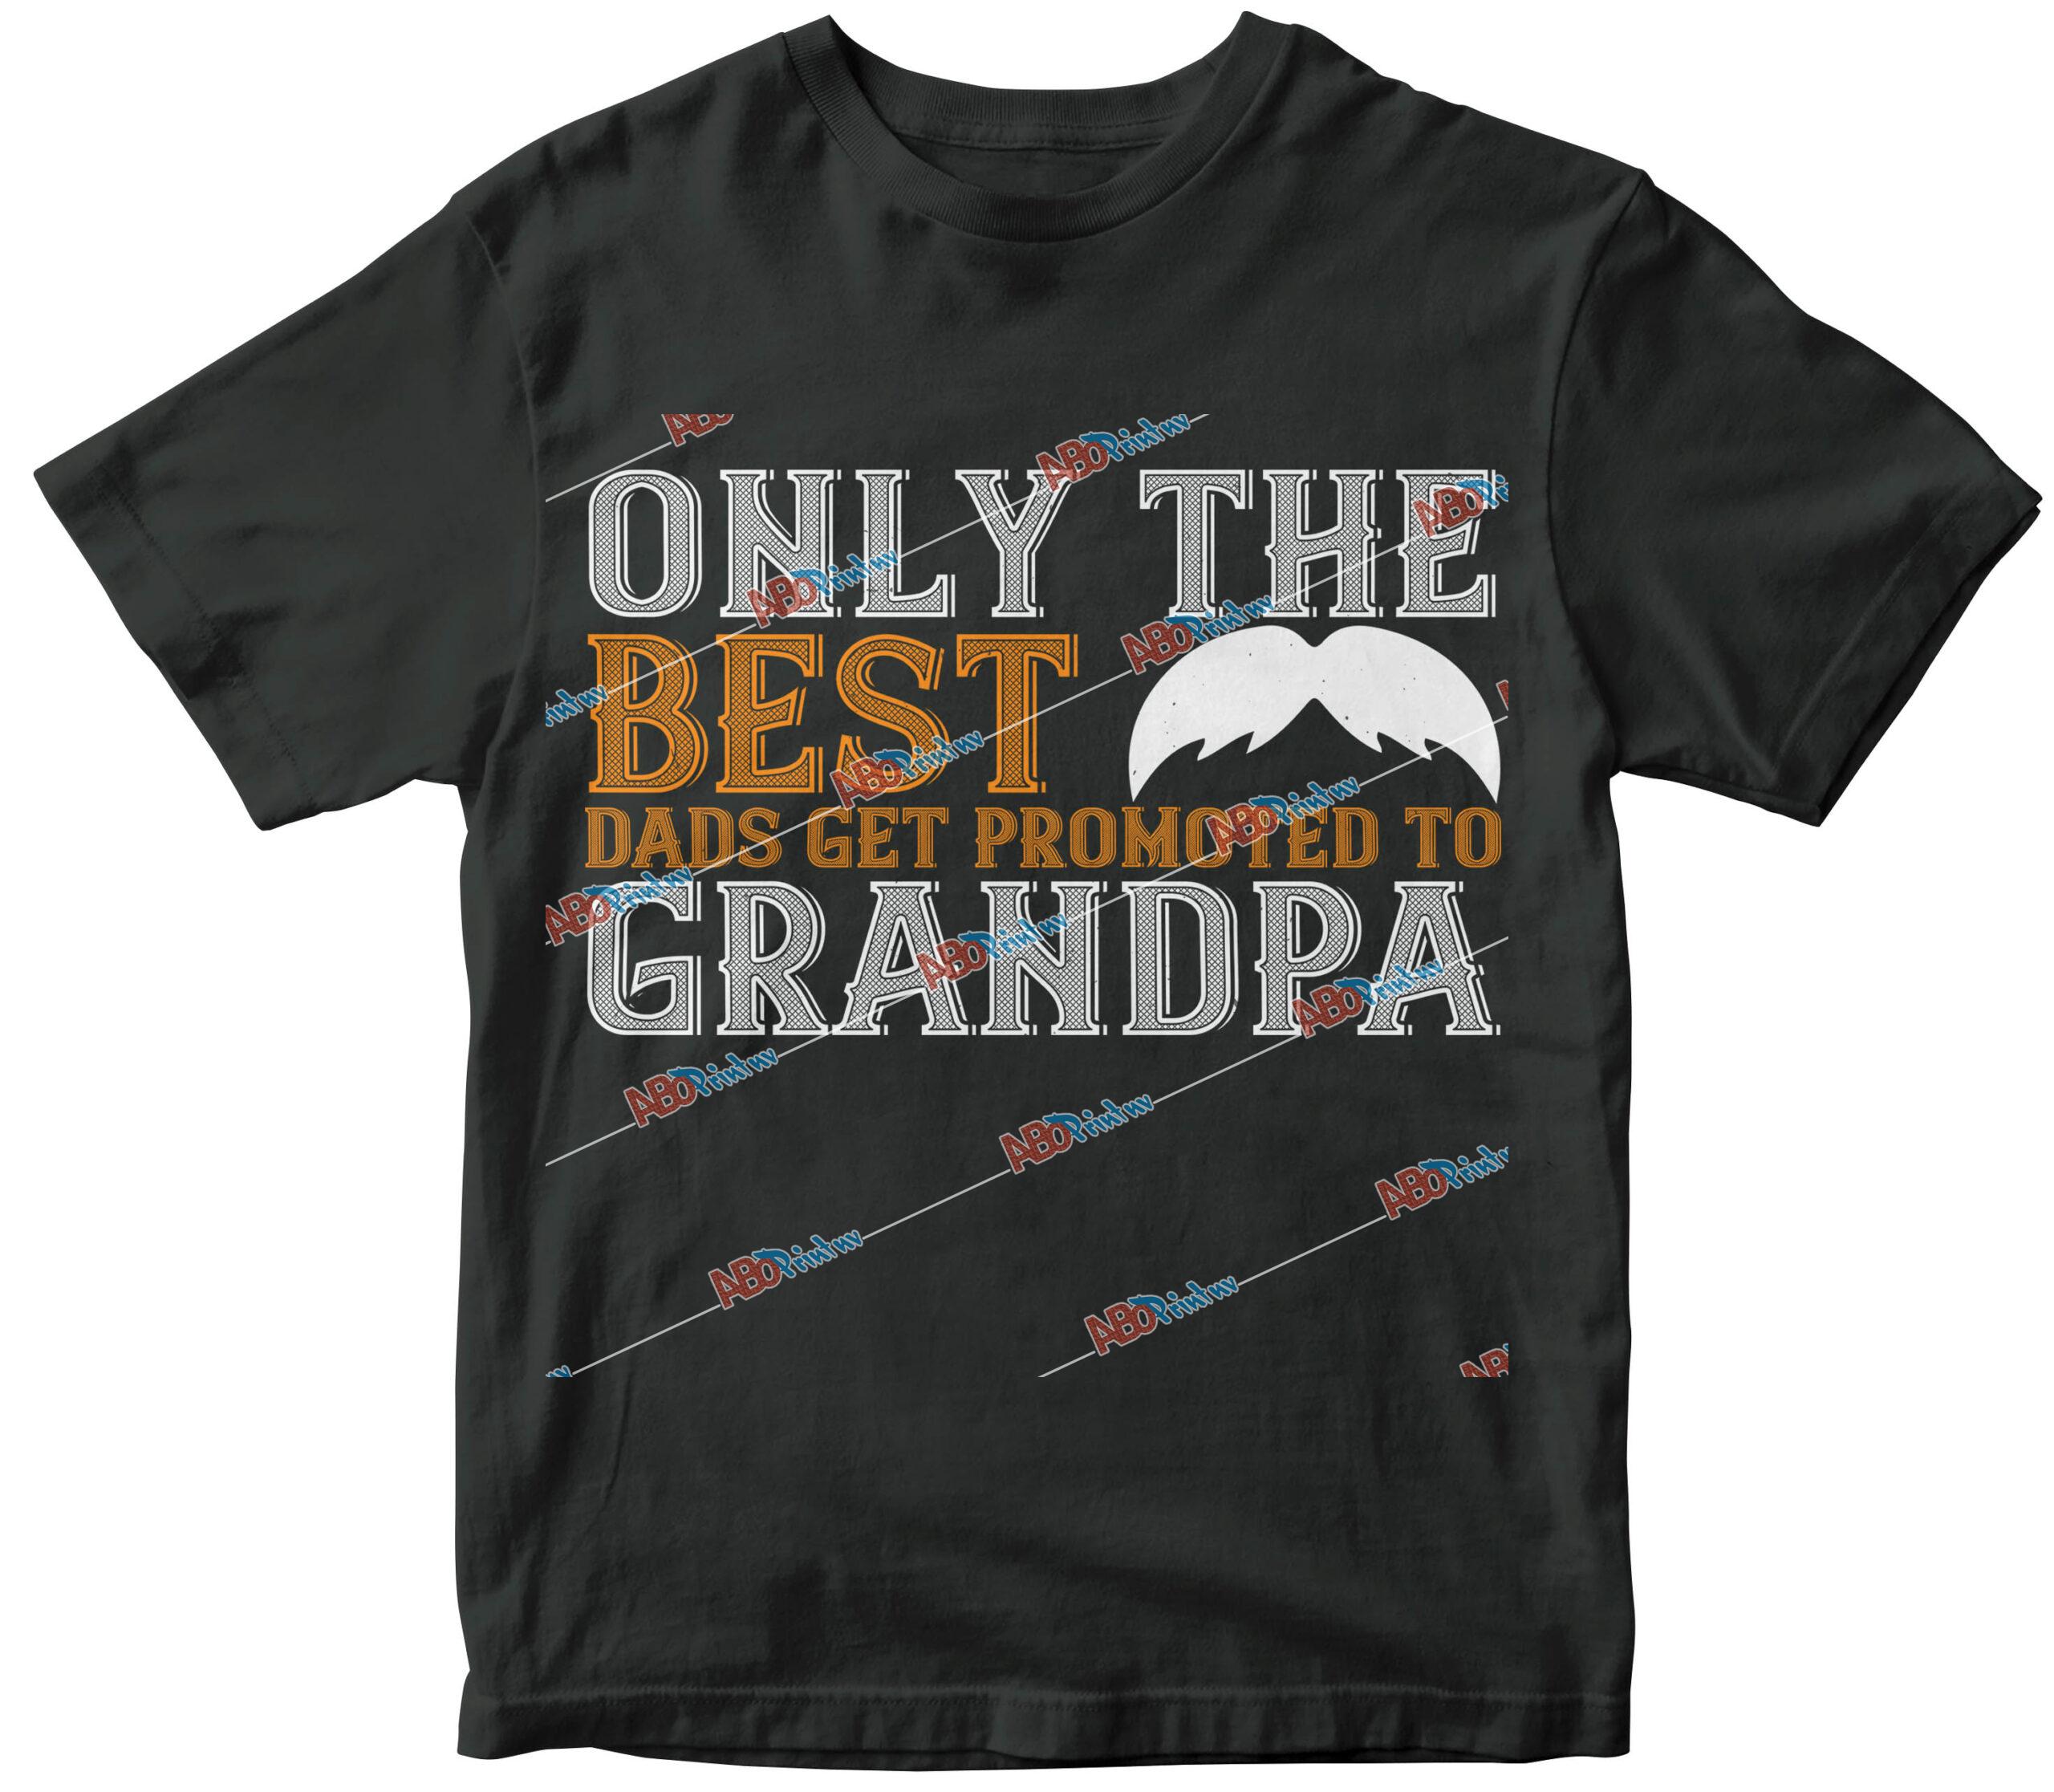 Only the best dads get promoted to grandpa-02.jpg